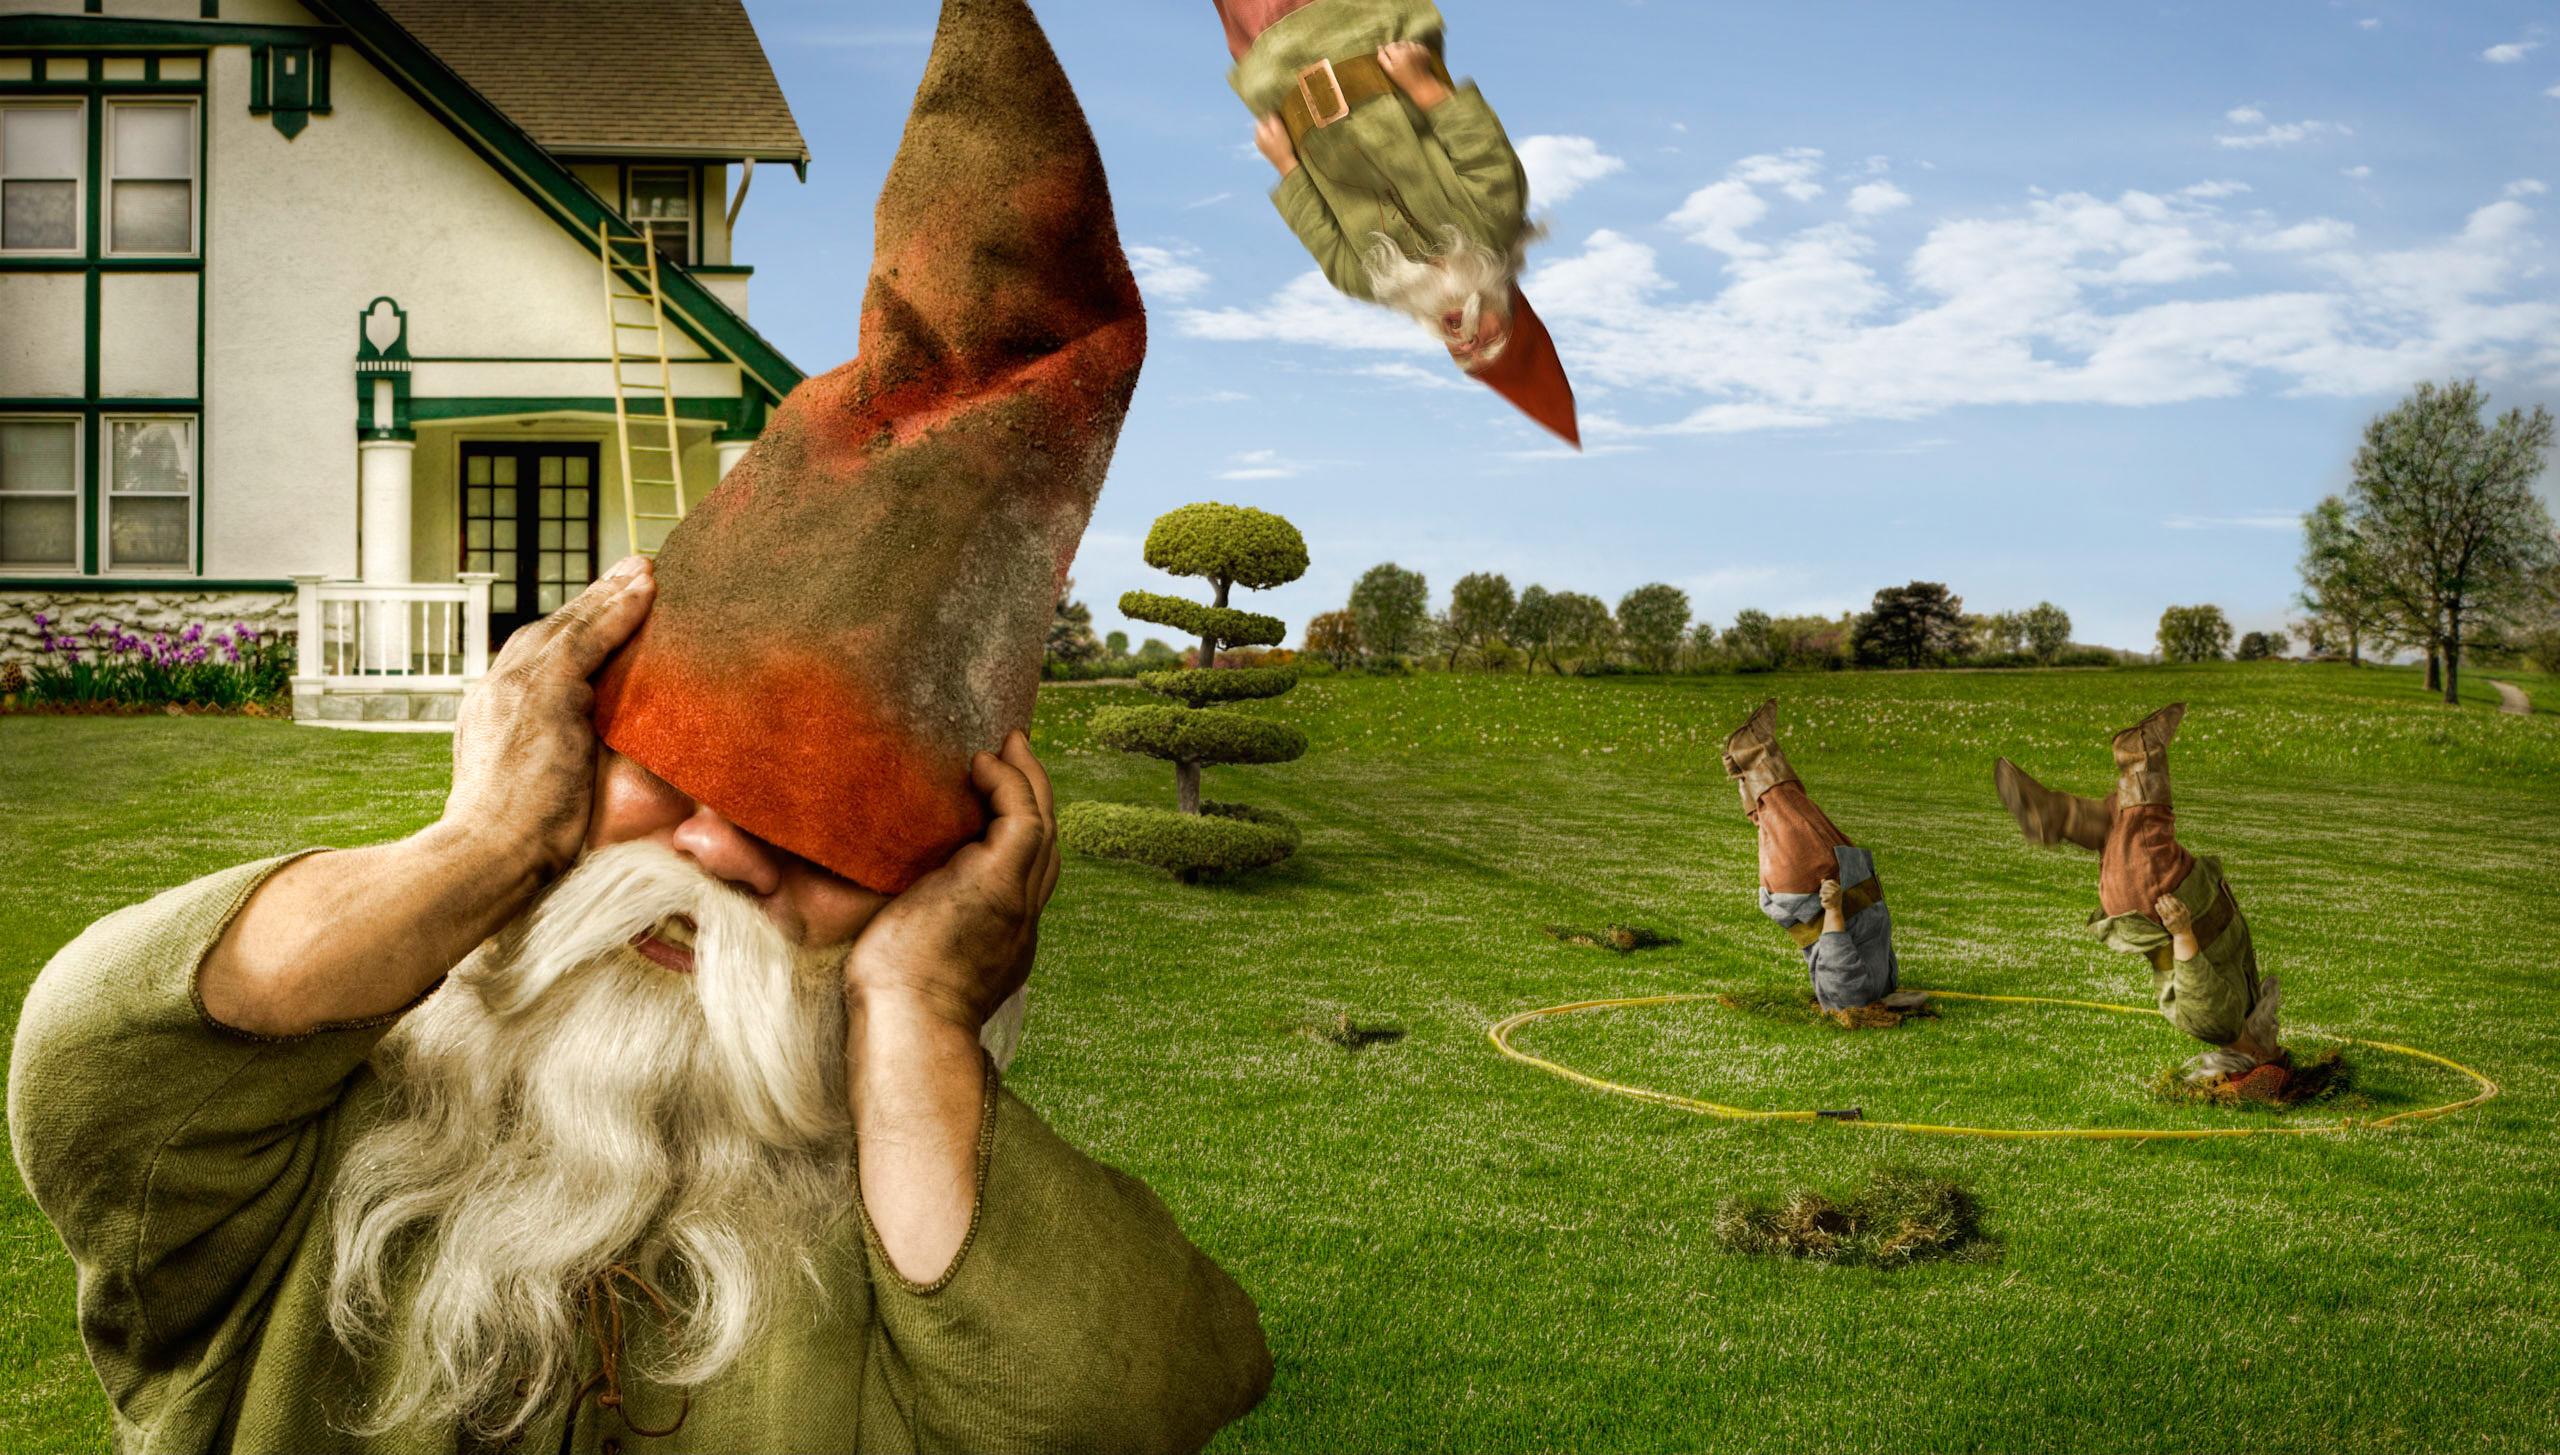 Gnome Darts - Photograph by Nick Vedros